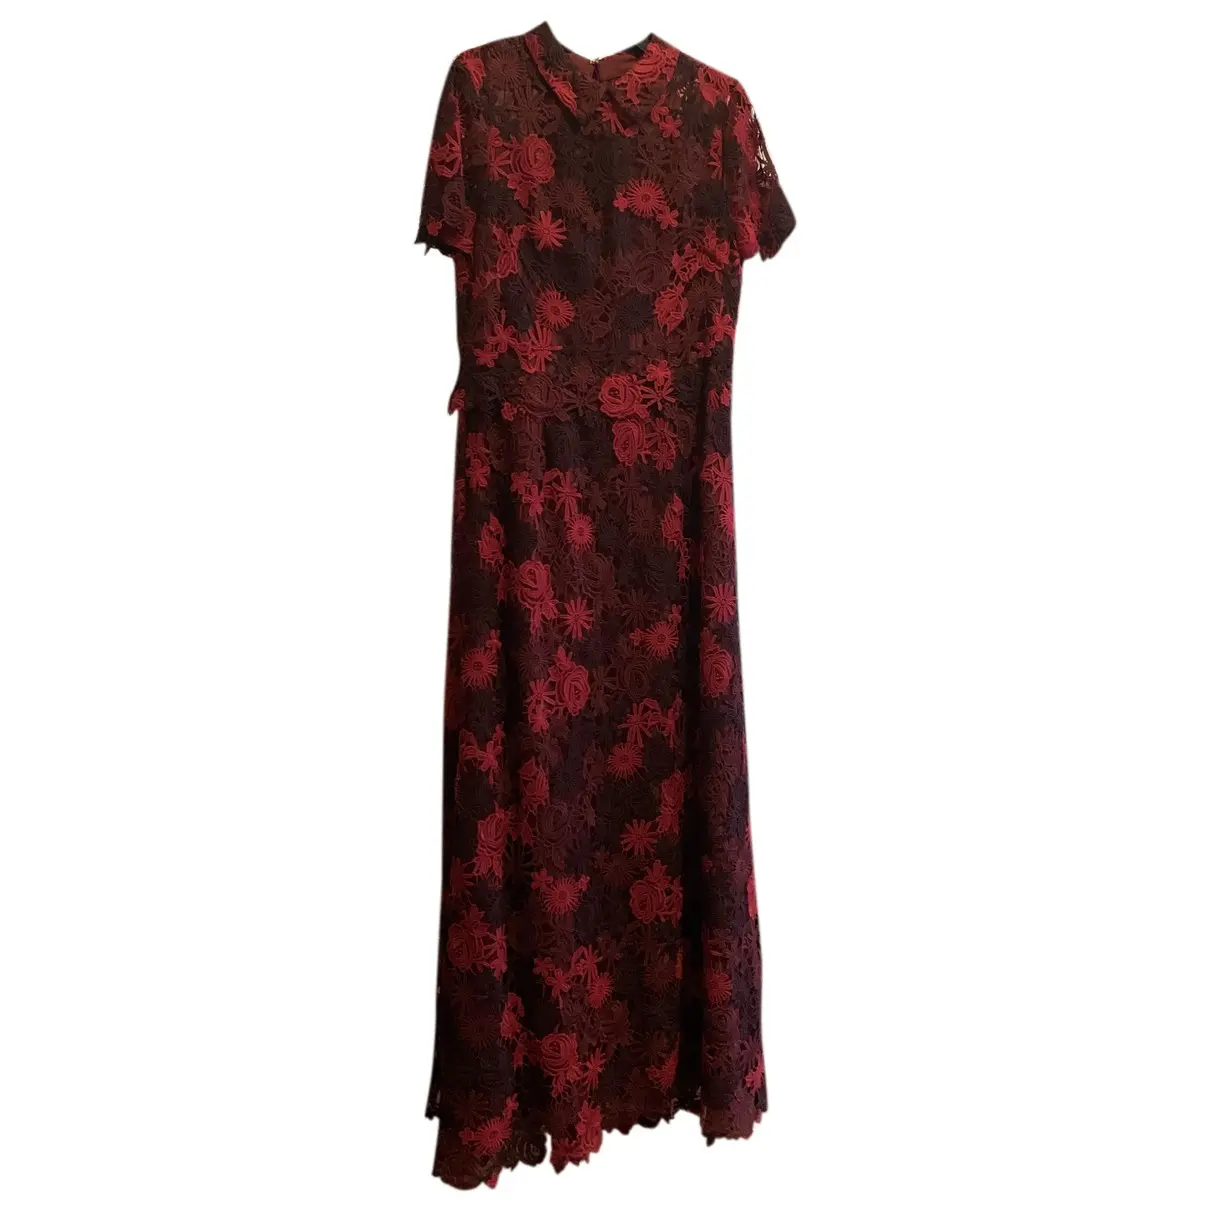 Lace maxi dress MIKAEL AGHAL